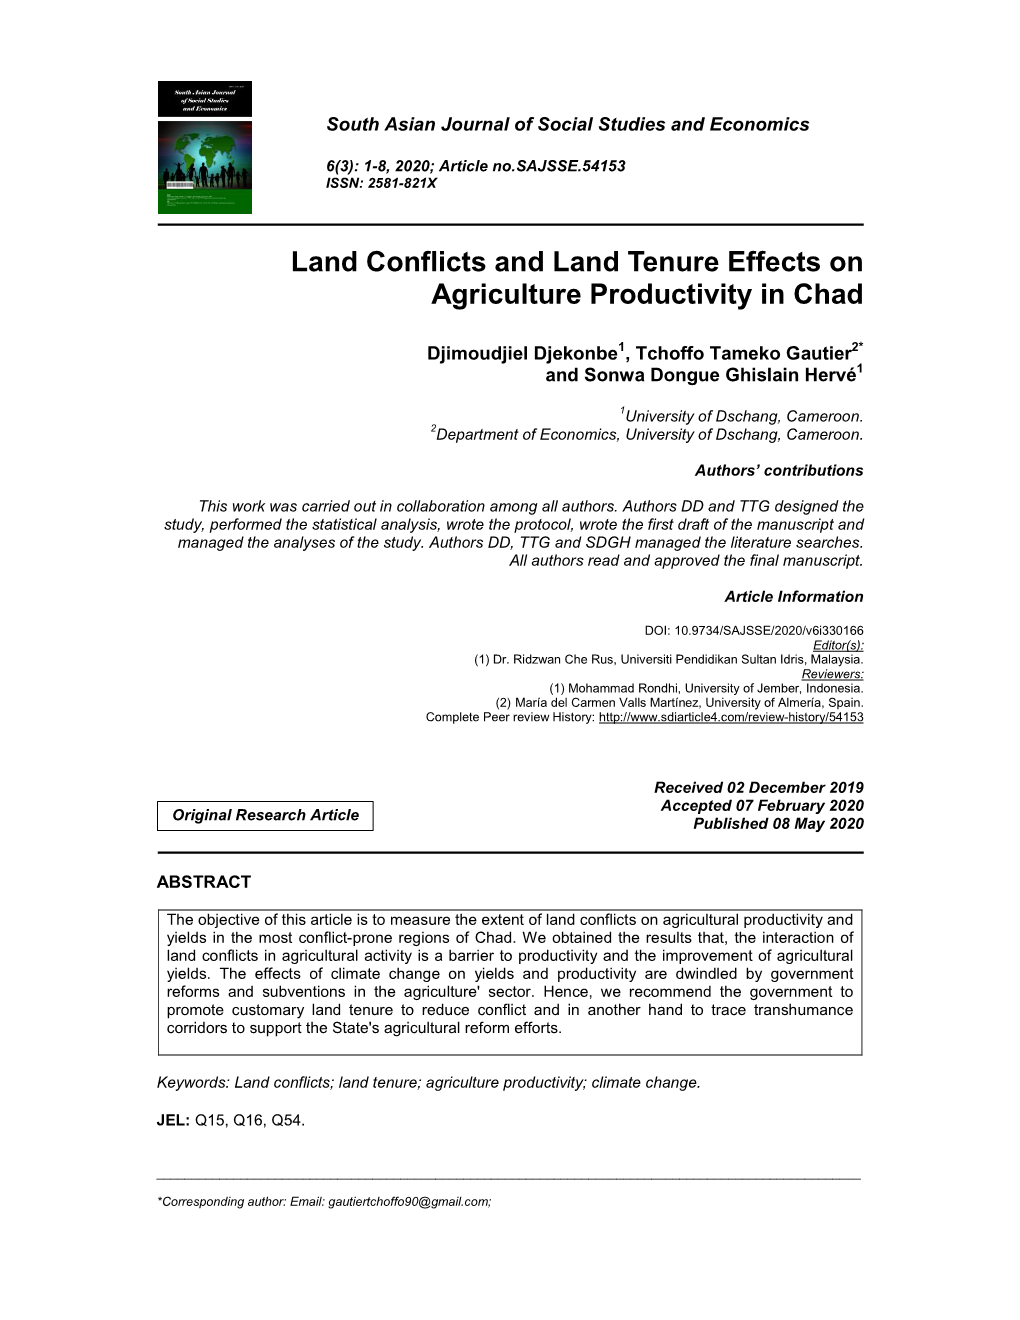 Land Conflicts and Land Tenure Effects on Agriculture Productivity in Chad